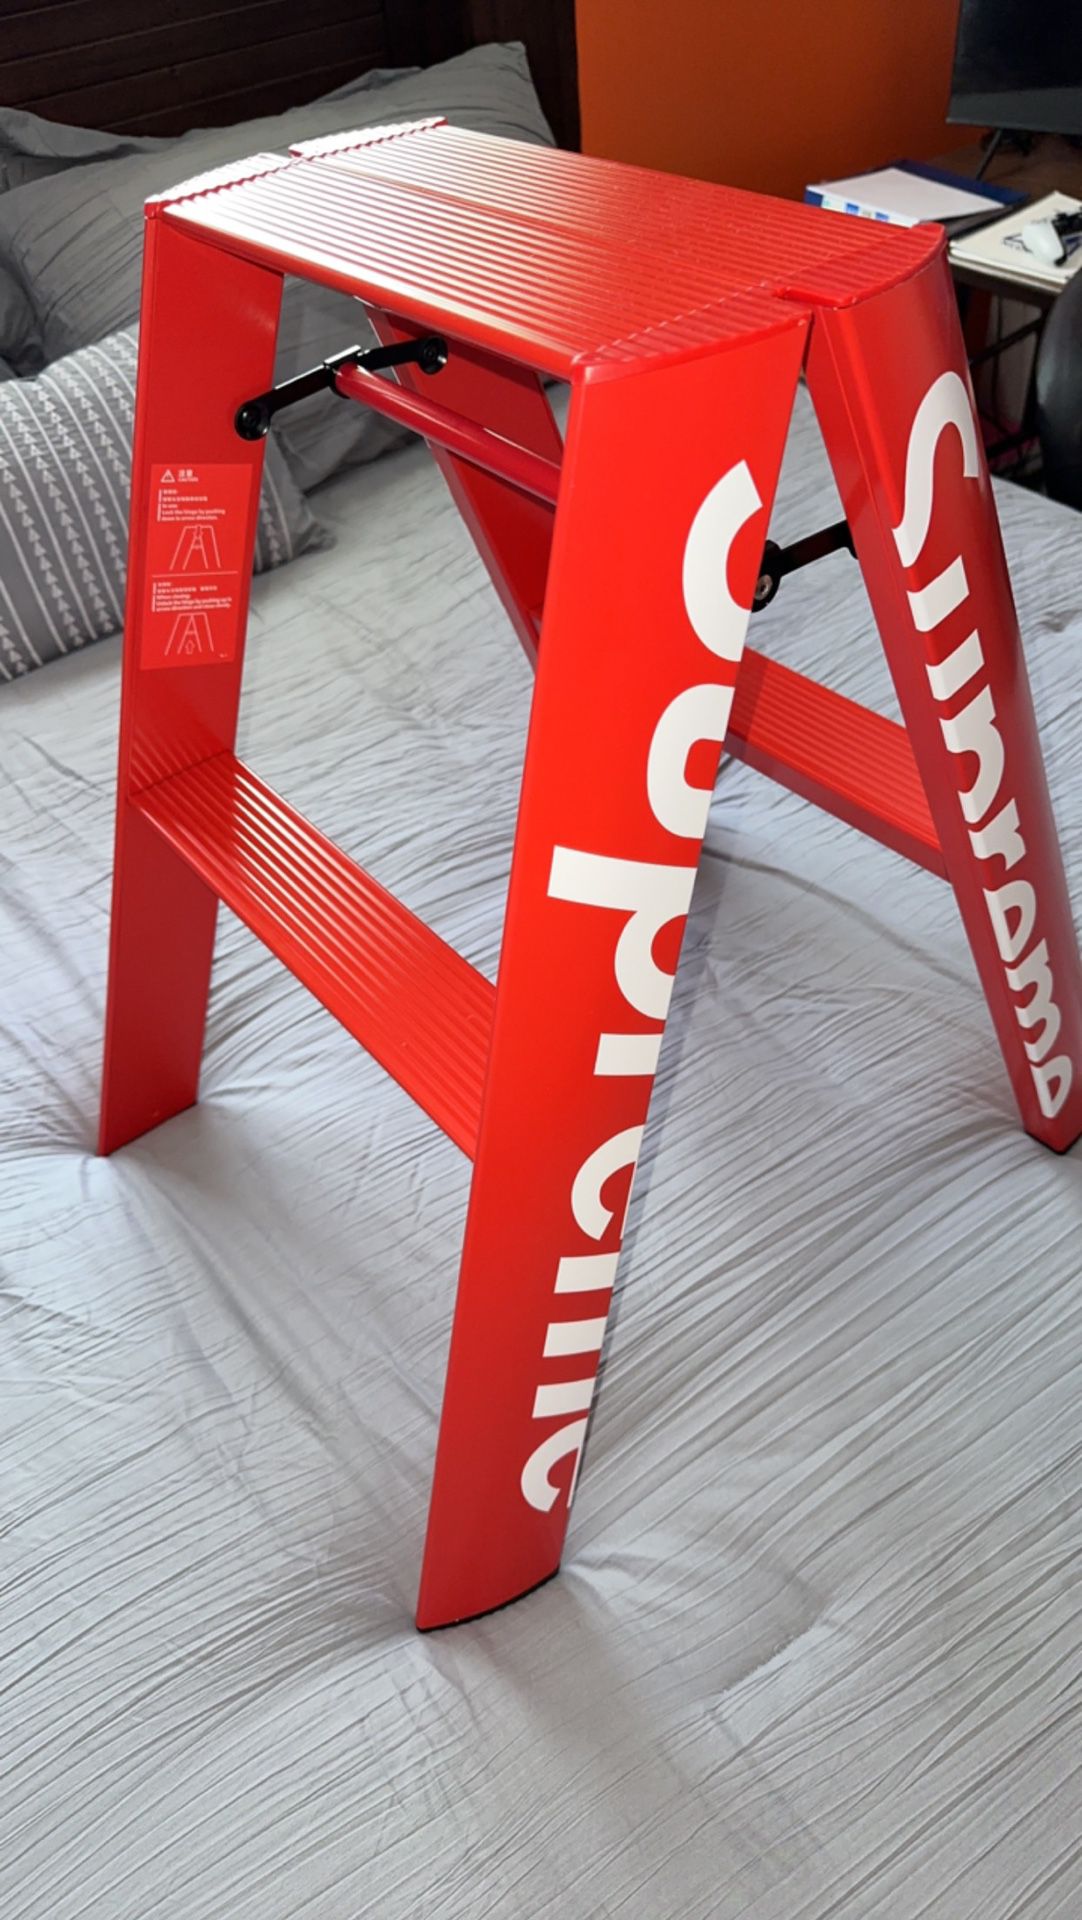 Supreme Red Lucano Step Ladder for Sale in Rock Hill, SC - OfferUp